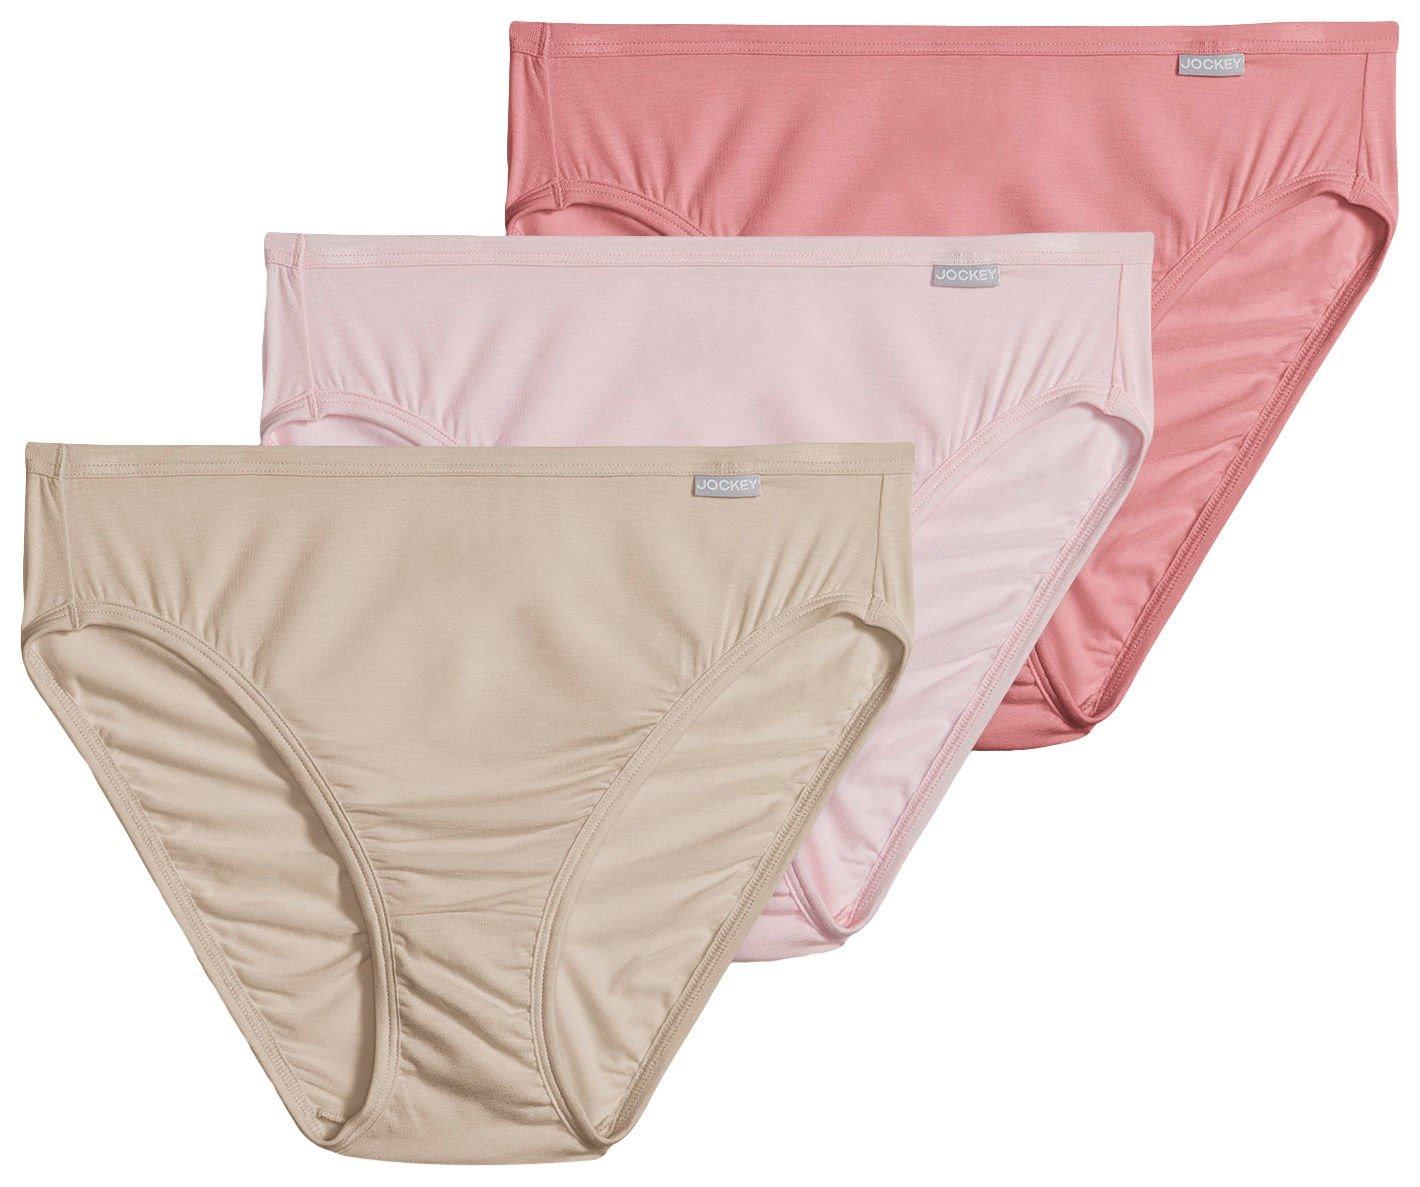 3-pk. Elance Supersoft French Cut Panties 2071